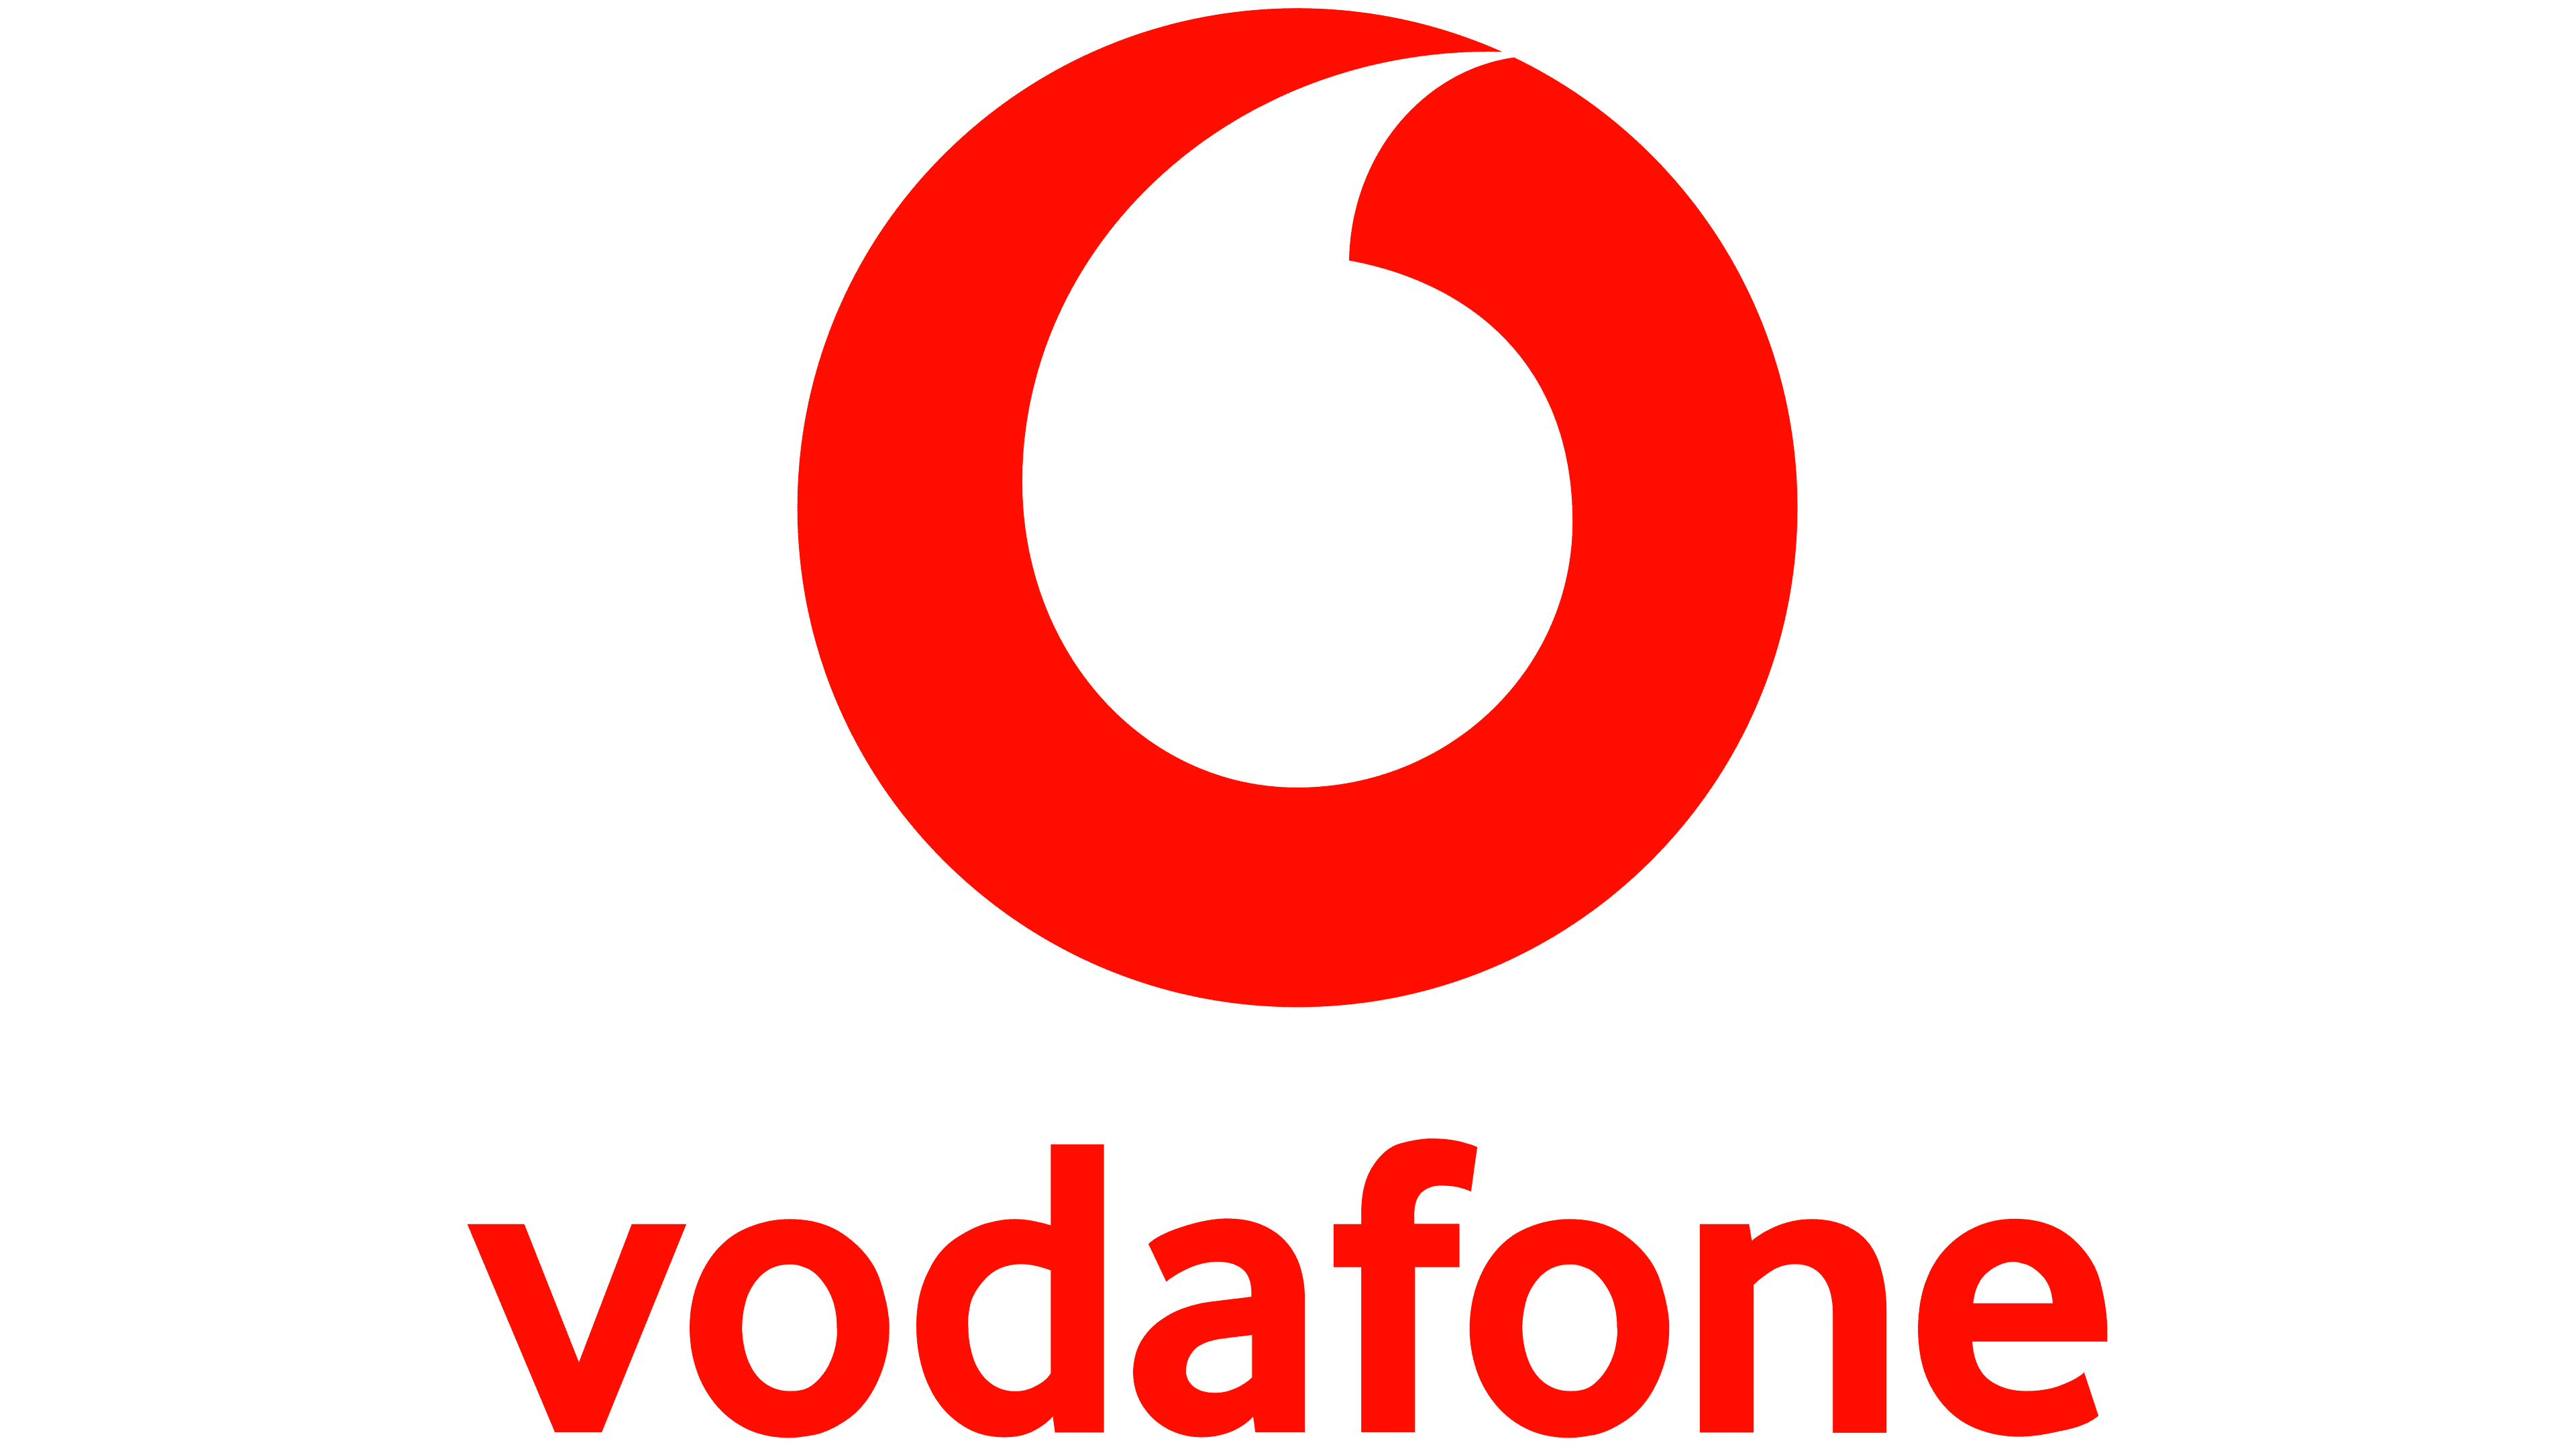 Vodafone Starts Negotiating Exit from  Hungary for HUF 715 Billion